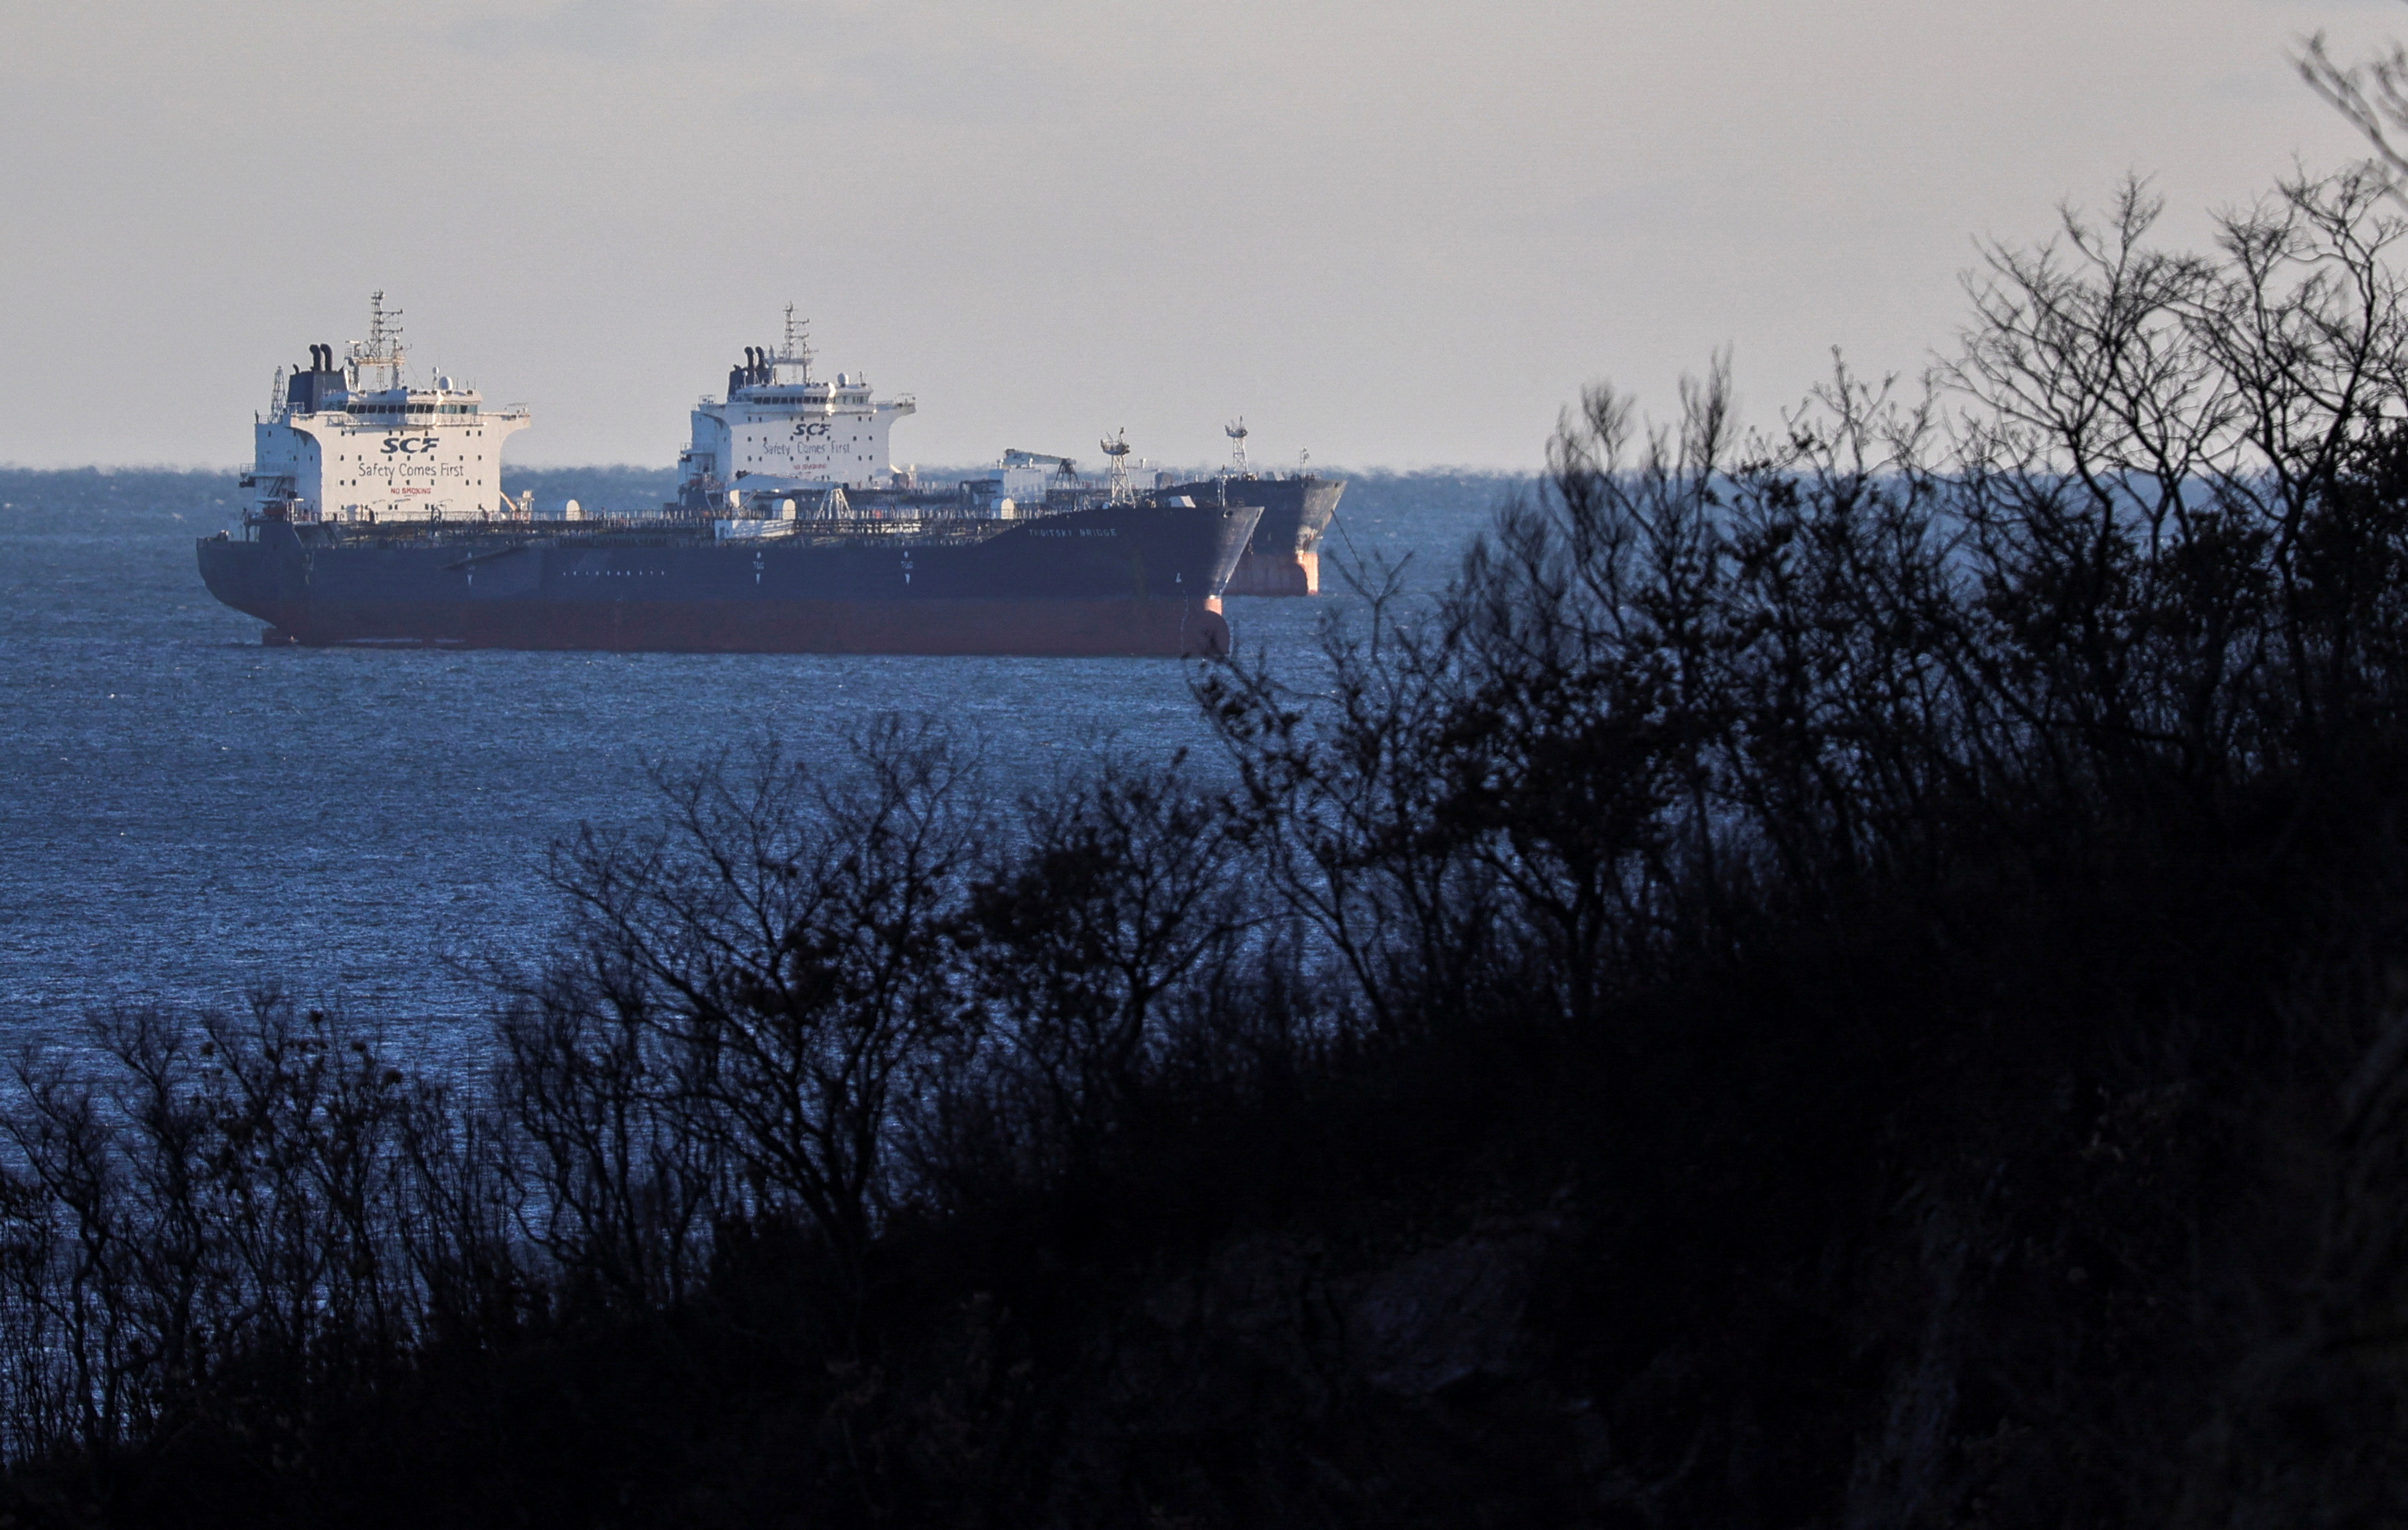 Crude oil tankers lie at anchor in Nakhodka Bay